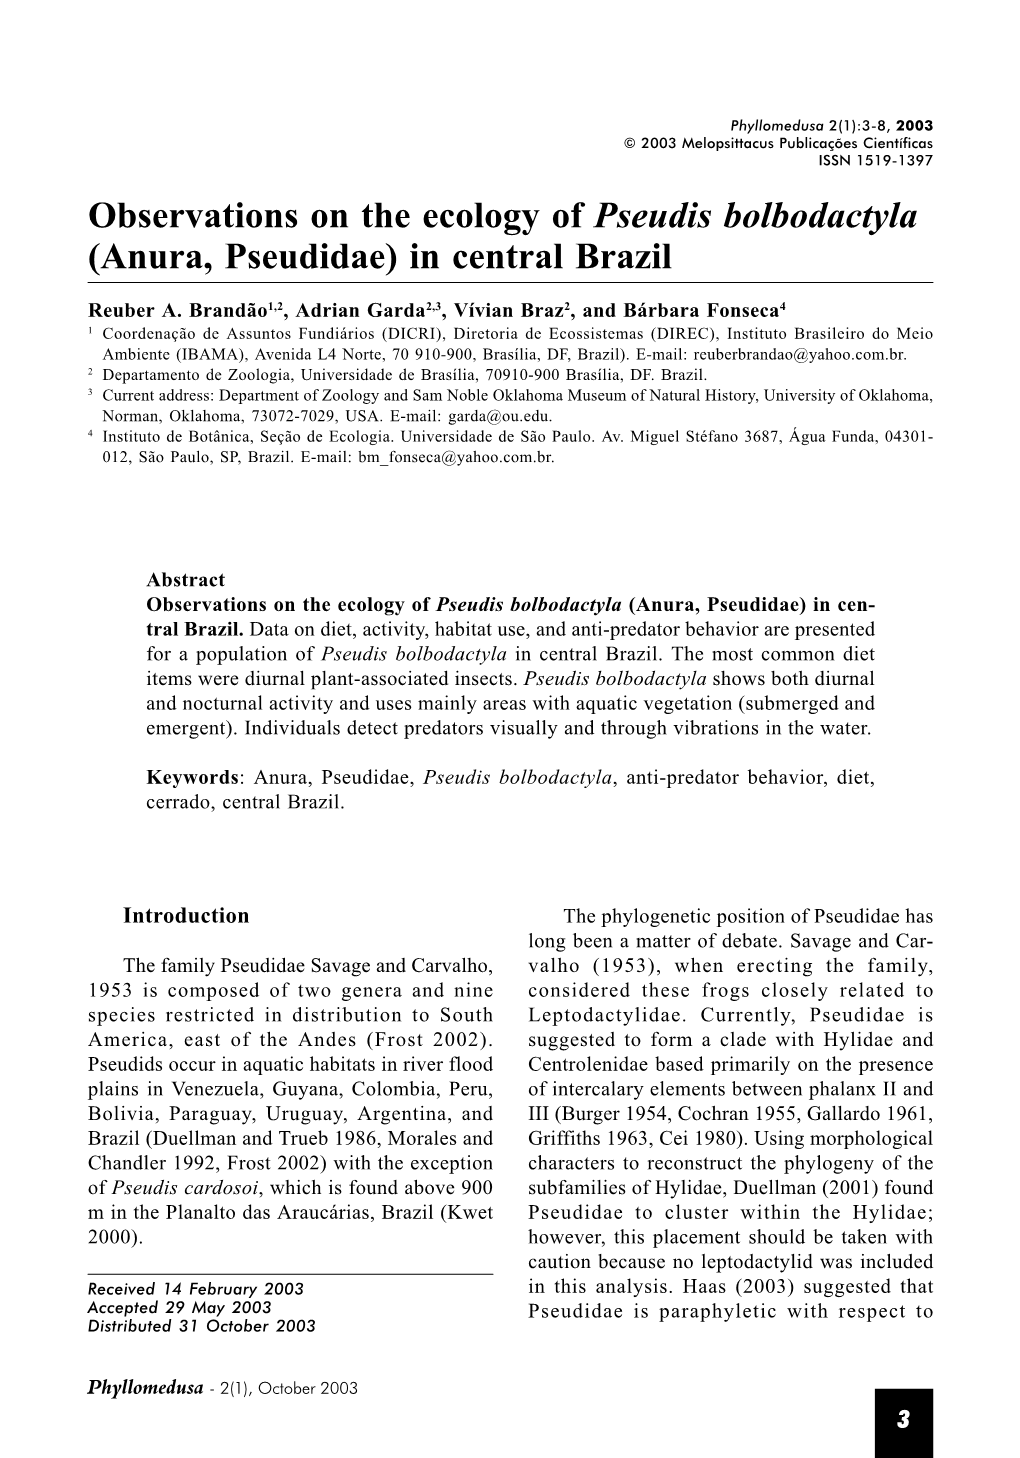 Observations on the Ecology of Pseudis Bolbodactyla (Anura, Pseudidae) in Central Brazil